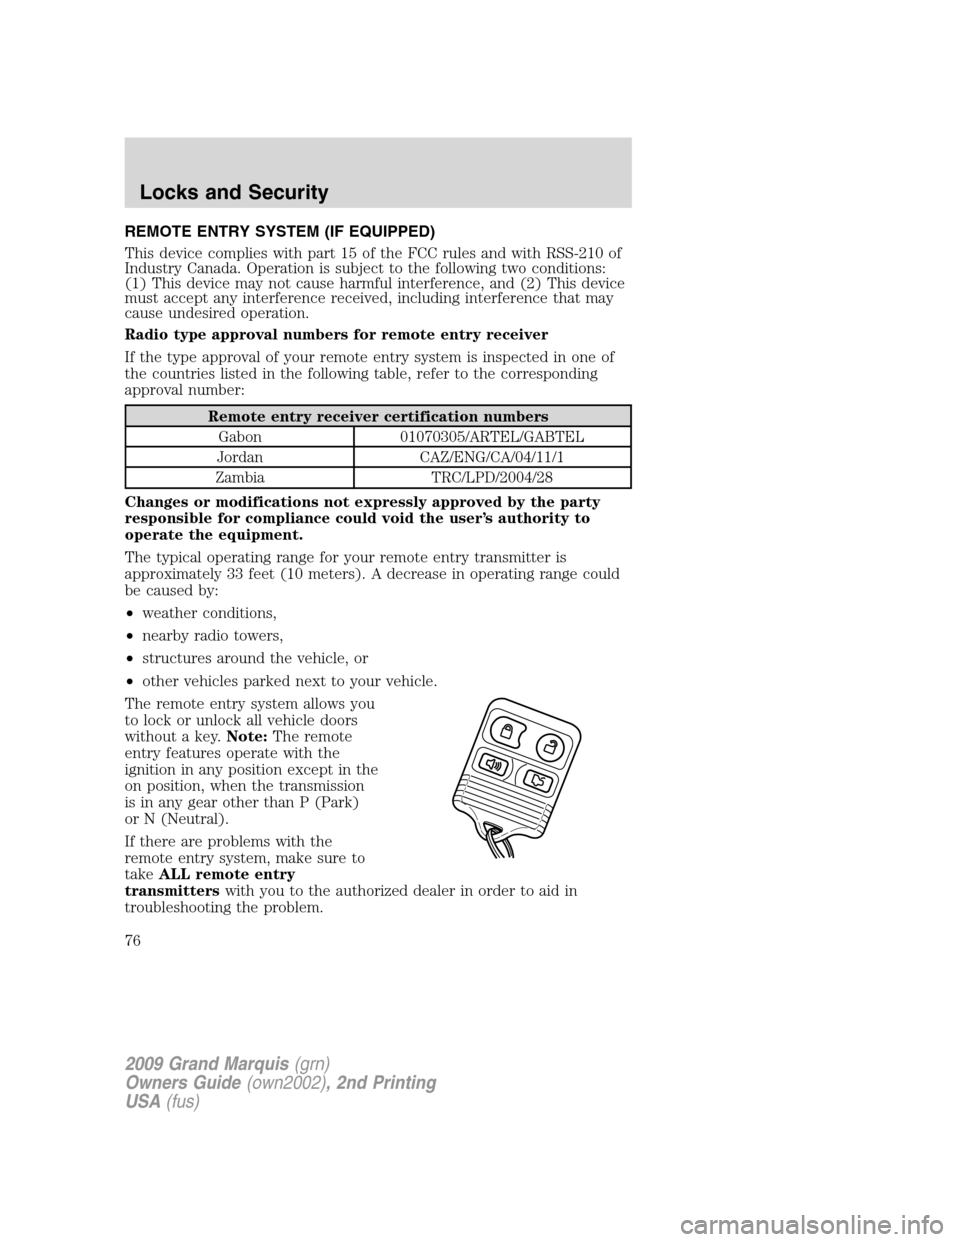 Mercury Grand Marquis 2009  s Manual PDF REMOTE ENTRY SYSTEM (IF EQUIPPED)
This device complies with part 15 of the FCC rules and with RSS-210 of
Industry Canada. Operation is subject to the following two conditions:
(1) This device may not 